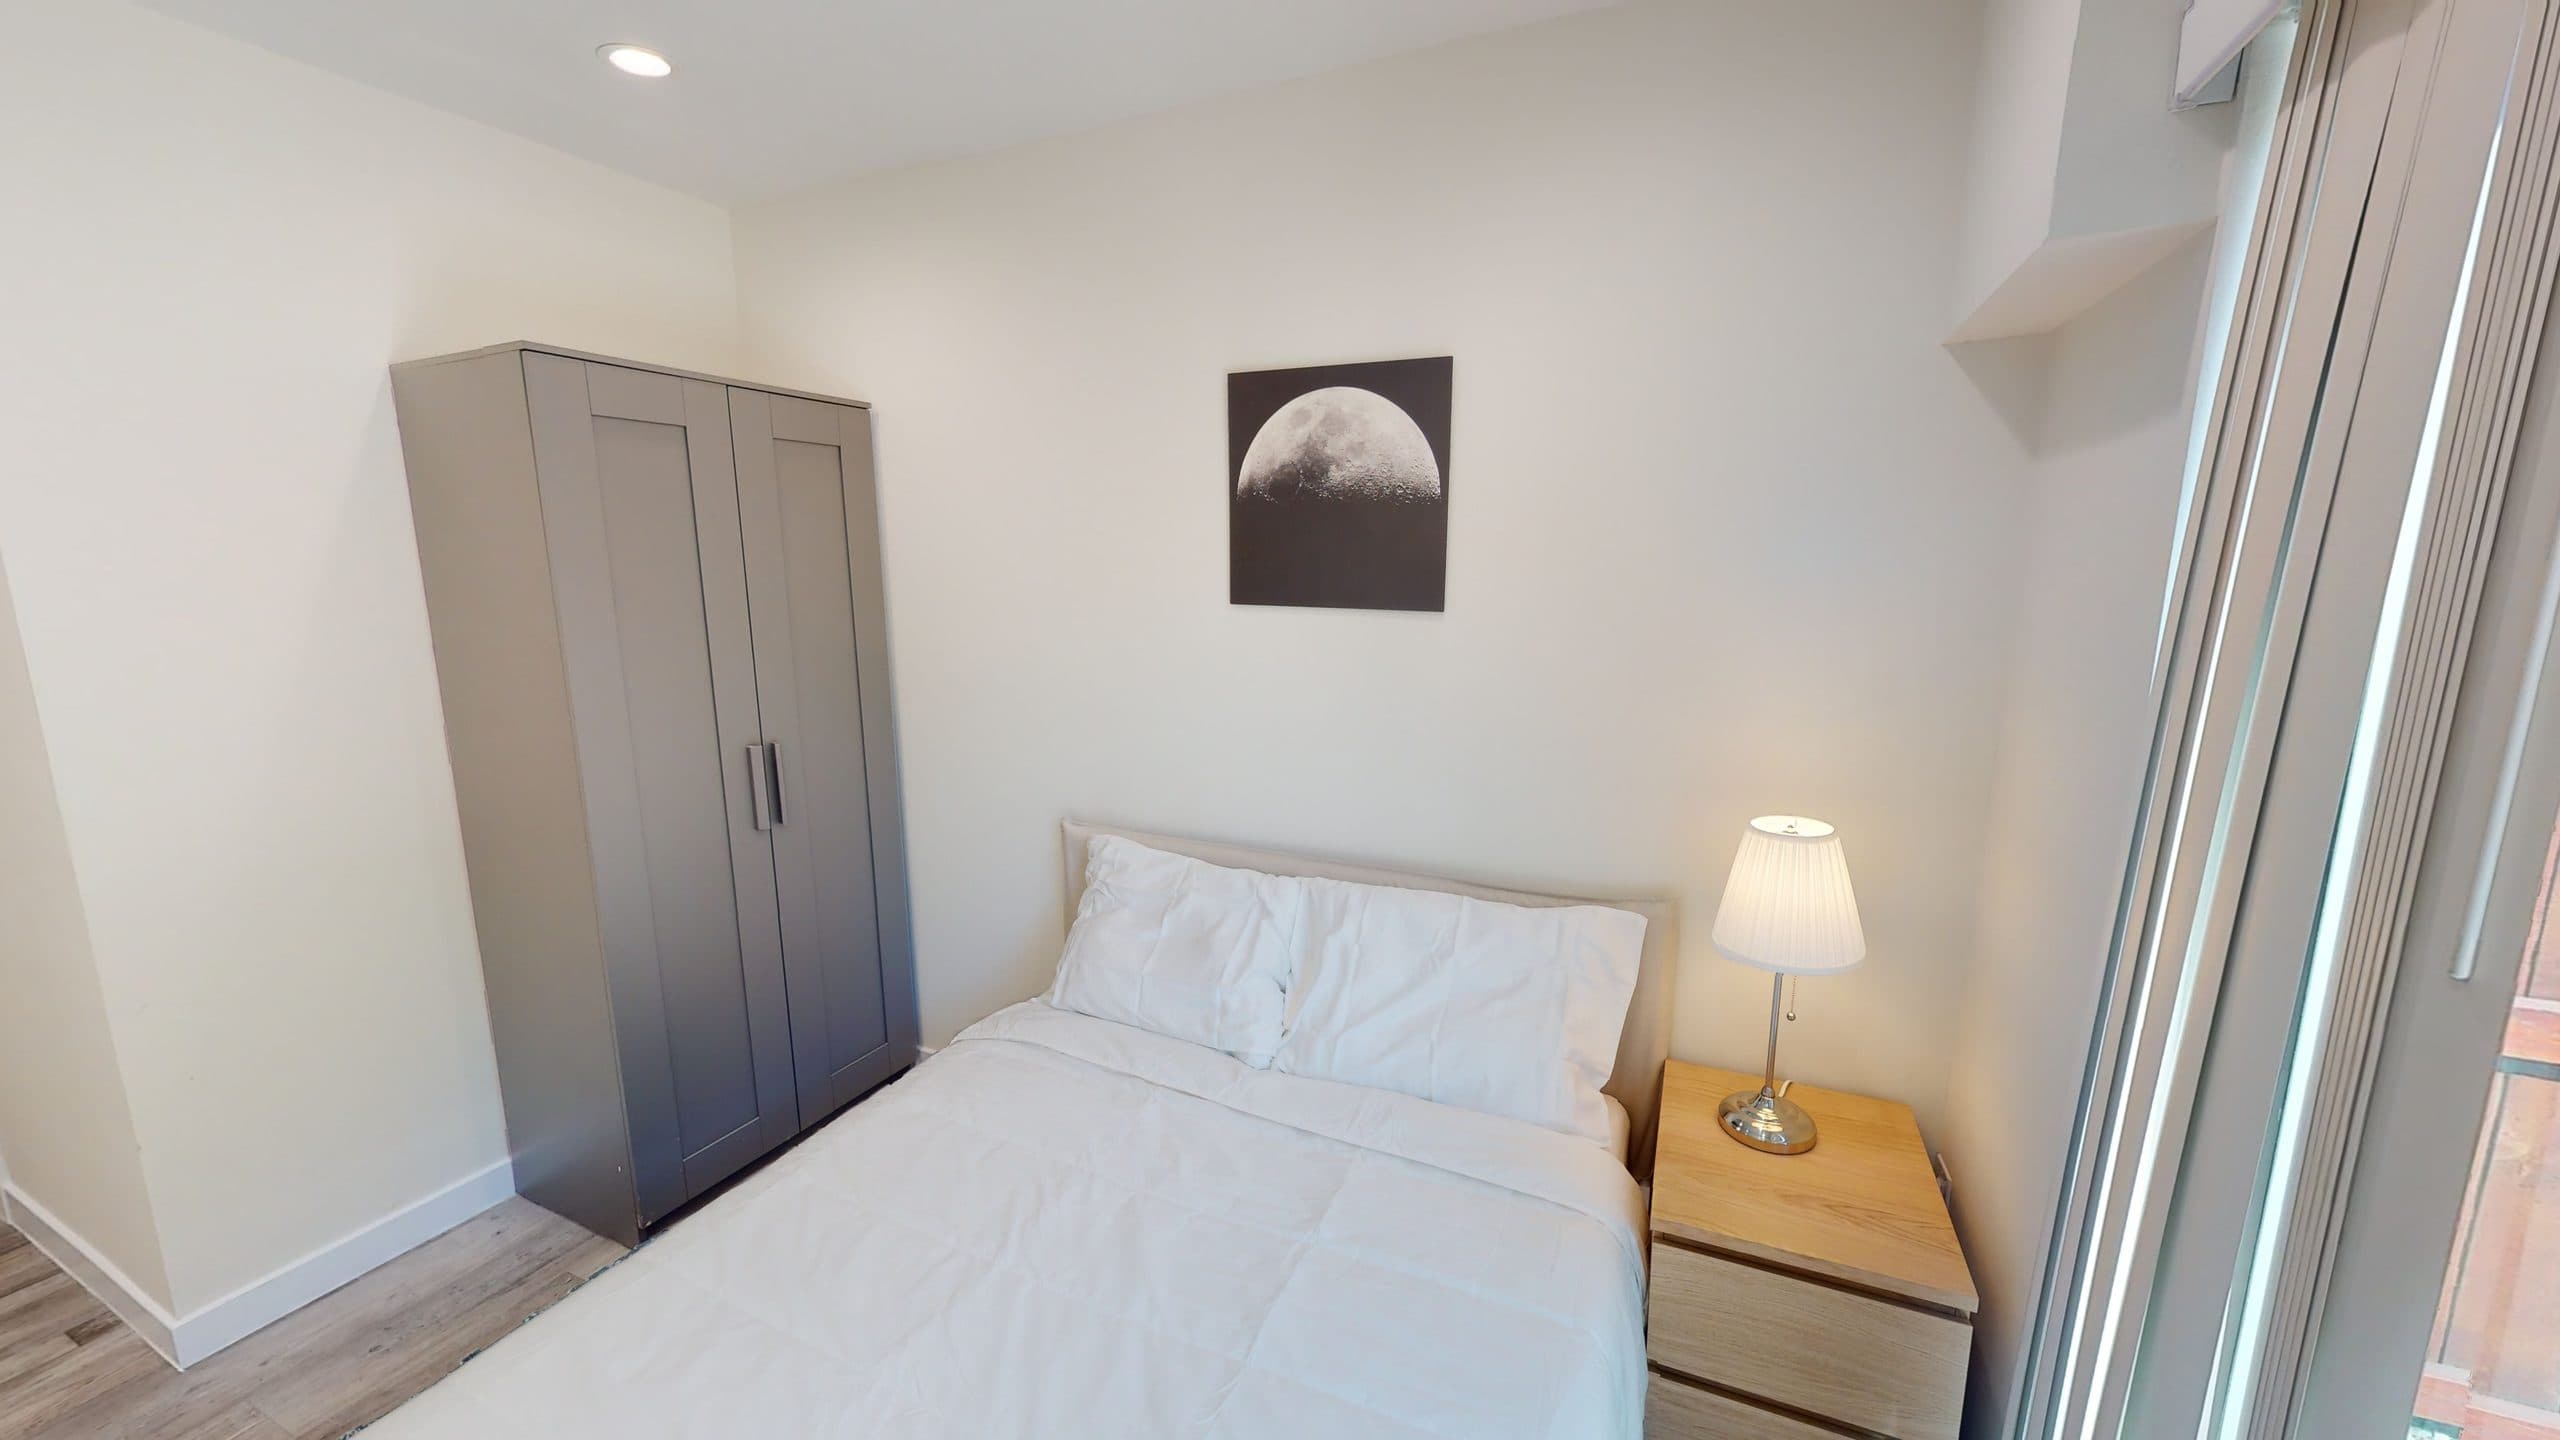 Photo 18 of #4398: Full Bedroom D w/ Private Bathroom at June Homes